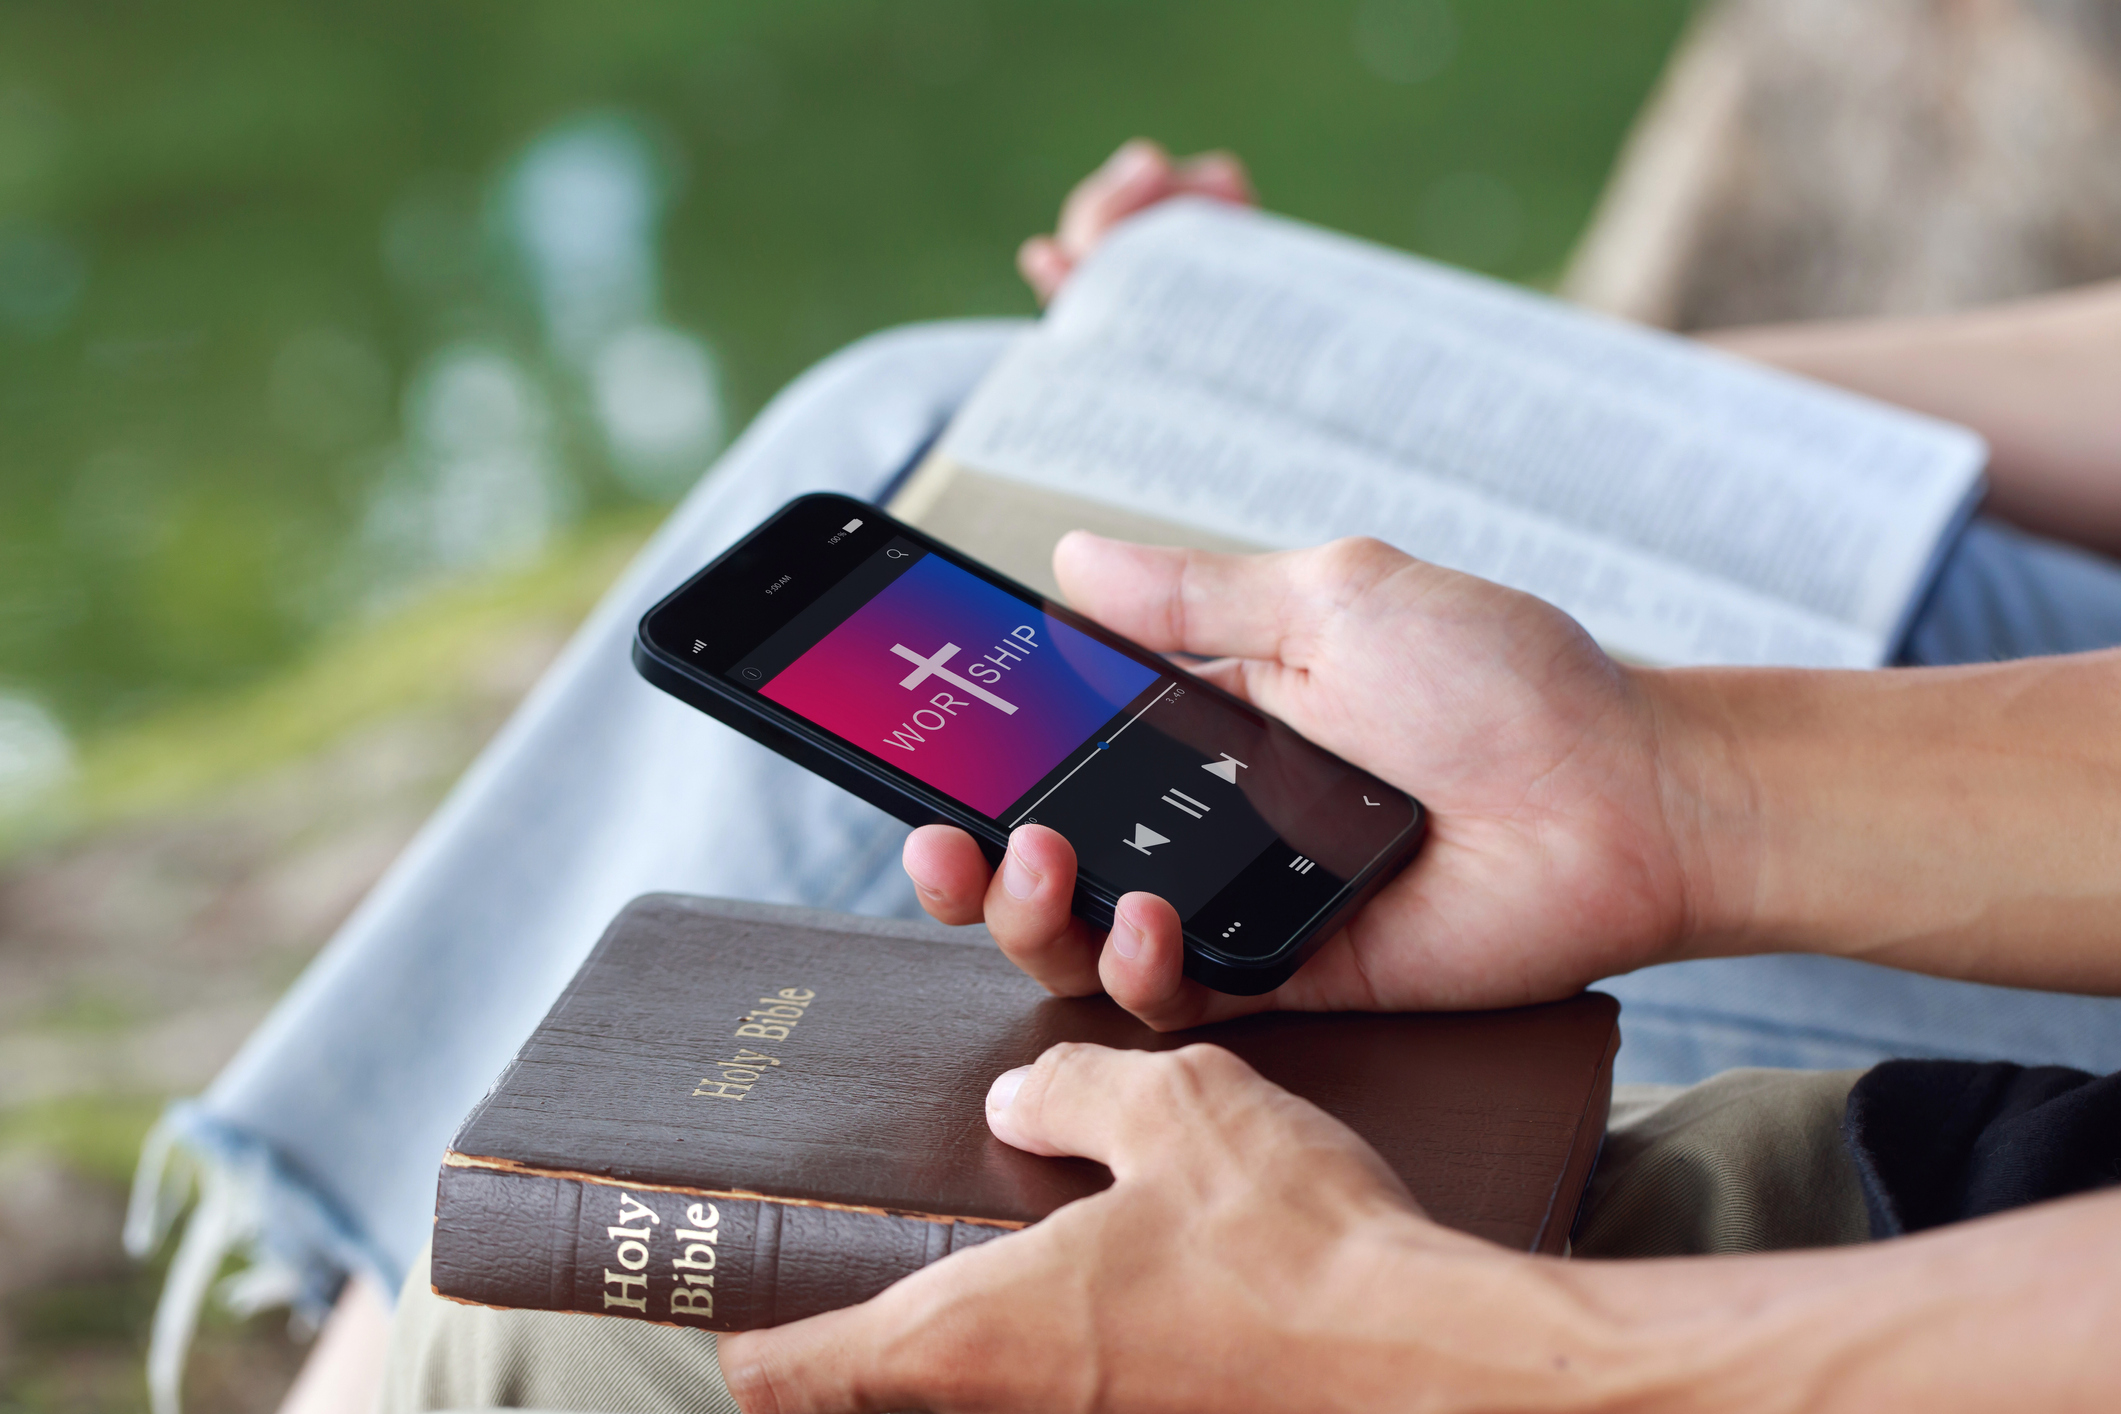 Christian friends group reading and study bible from mobile phones praying worship to GOD with church online Sunday in the garden at.Live Church with the bible. spirituality religion online concept